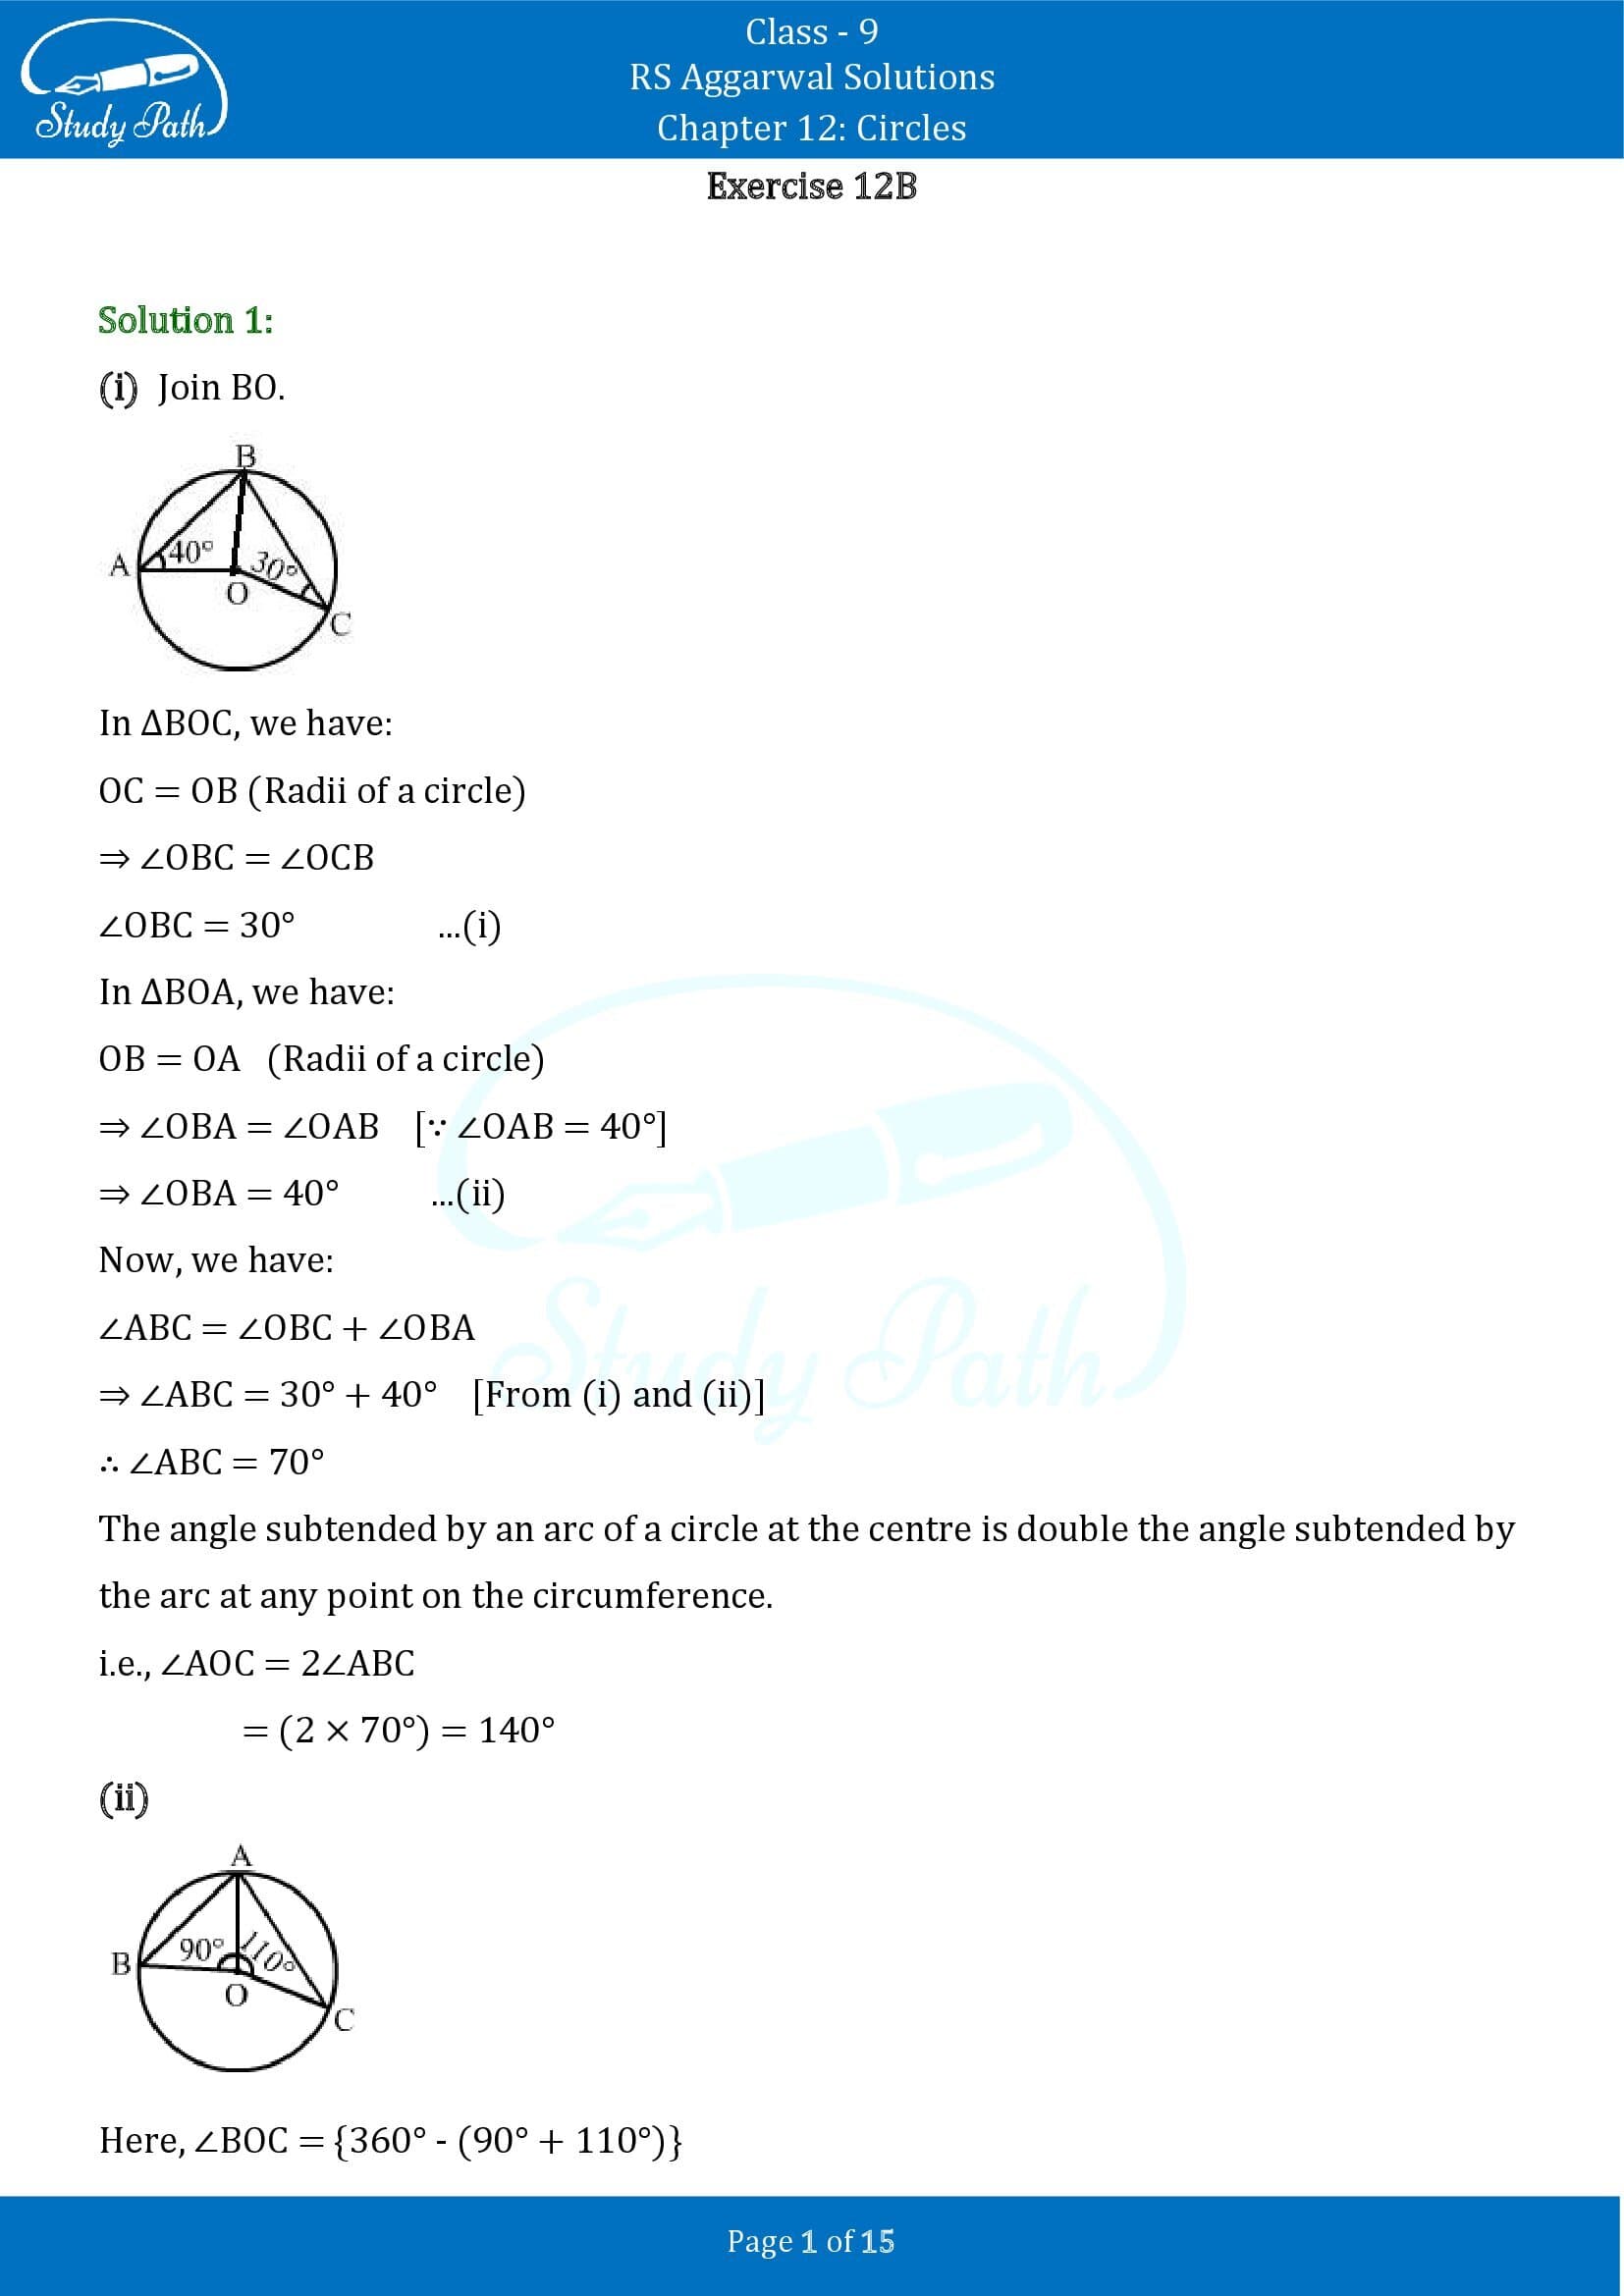 RS Aggarwal Solutions Class 9 Chapter 12 Circles Exercise 12B 00001